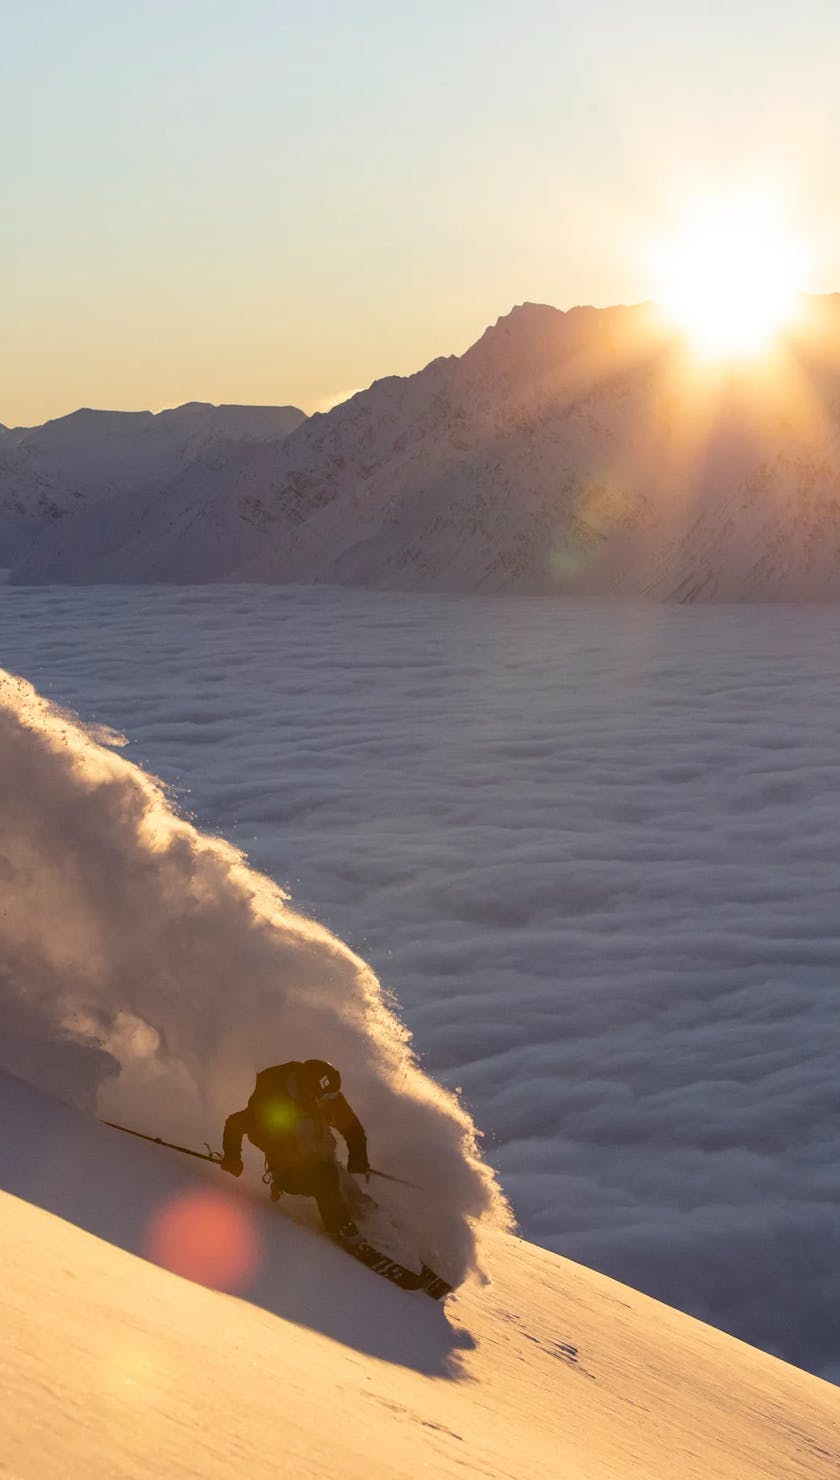 Skier in front of a sunset